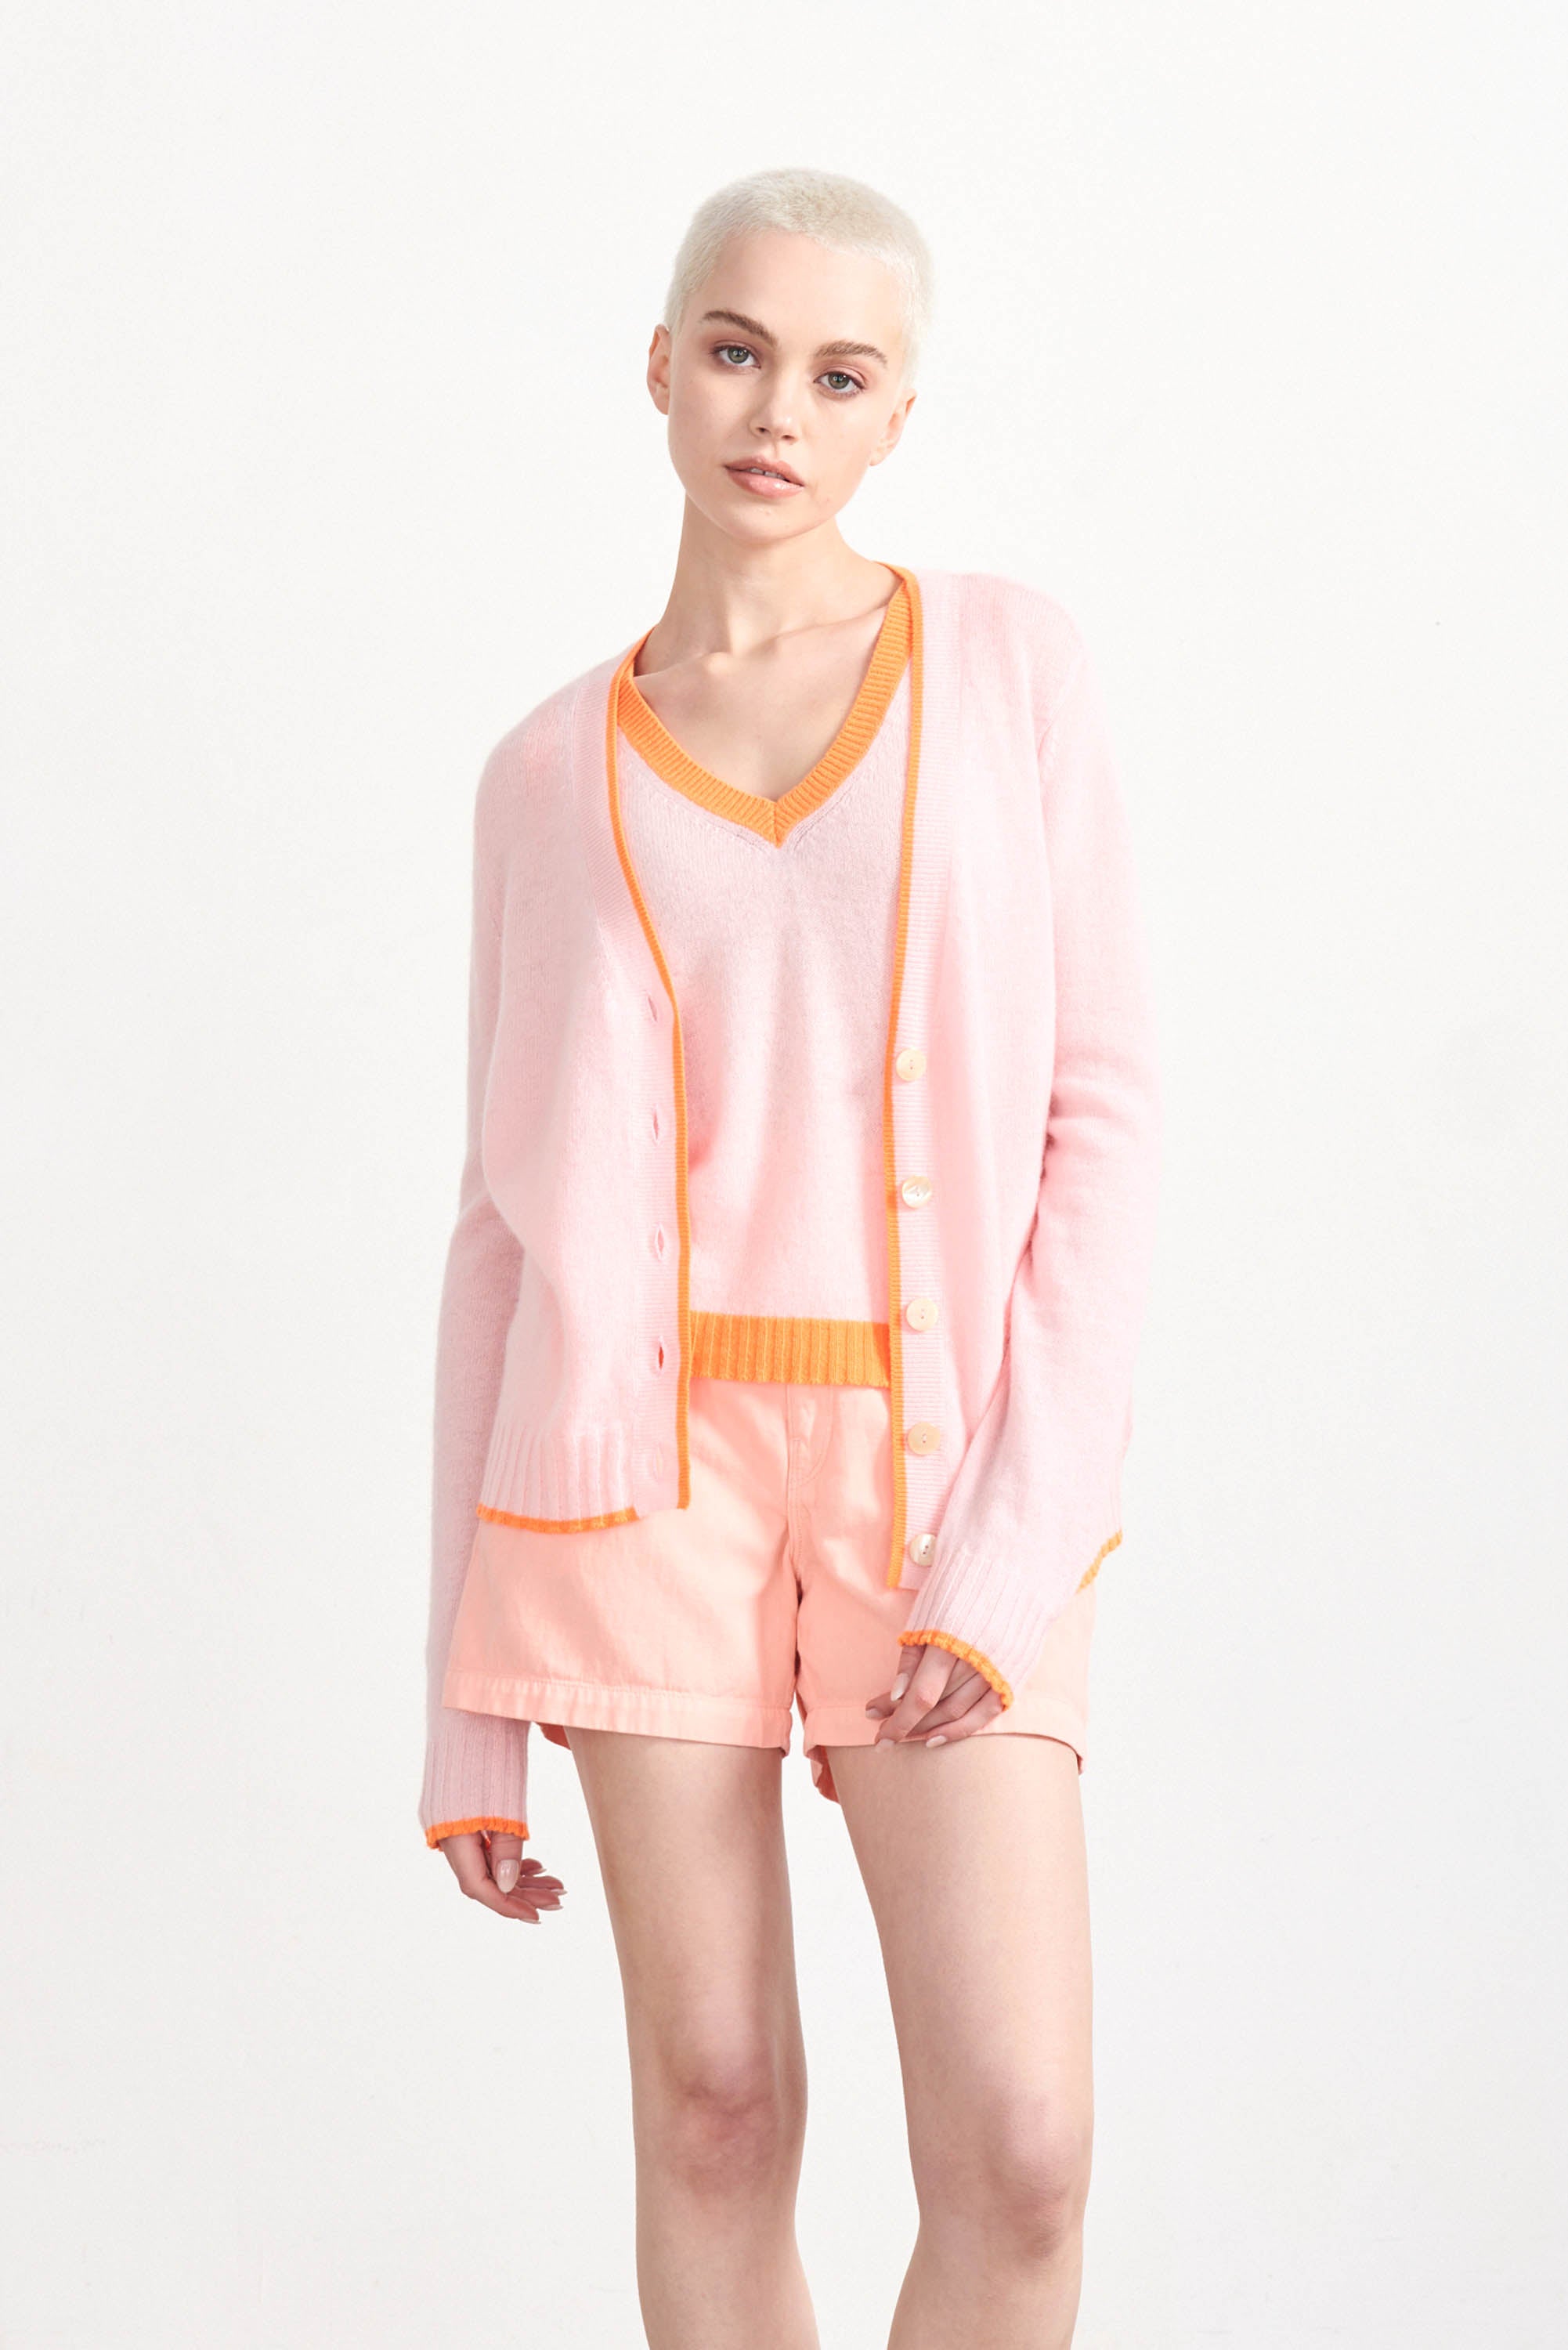 Blonde female model wearing Jumper1234 Pale pink cashmere vee neck tank with contrast neon orange ribs